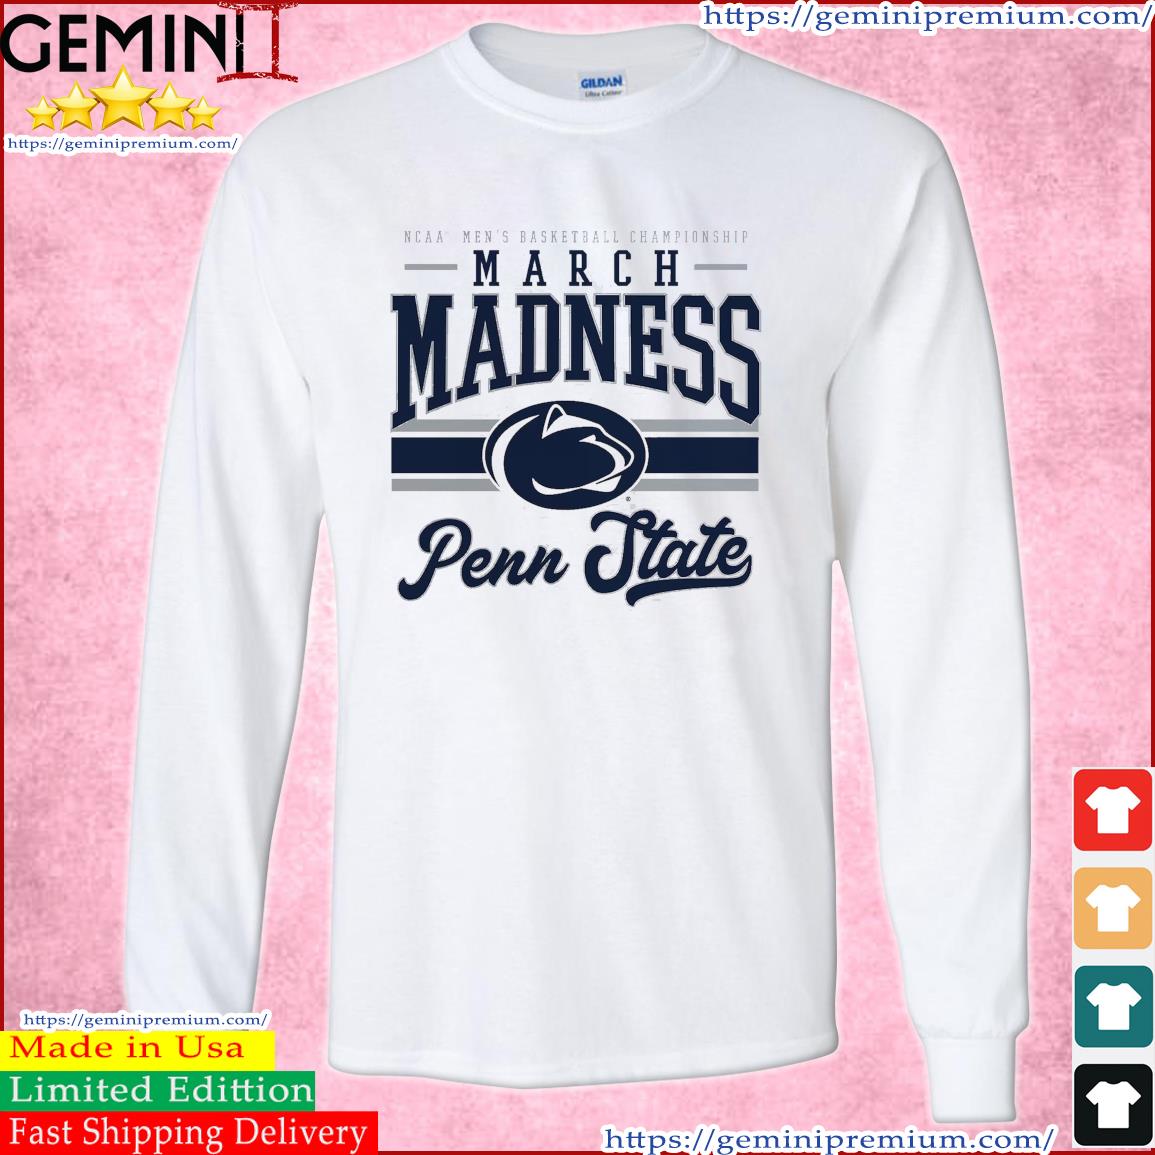 Penn State Nittany Lions NCAA Men's Basketball Tournament March Madness 2023 Shirt Long Sleeve Tee